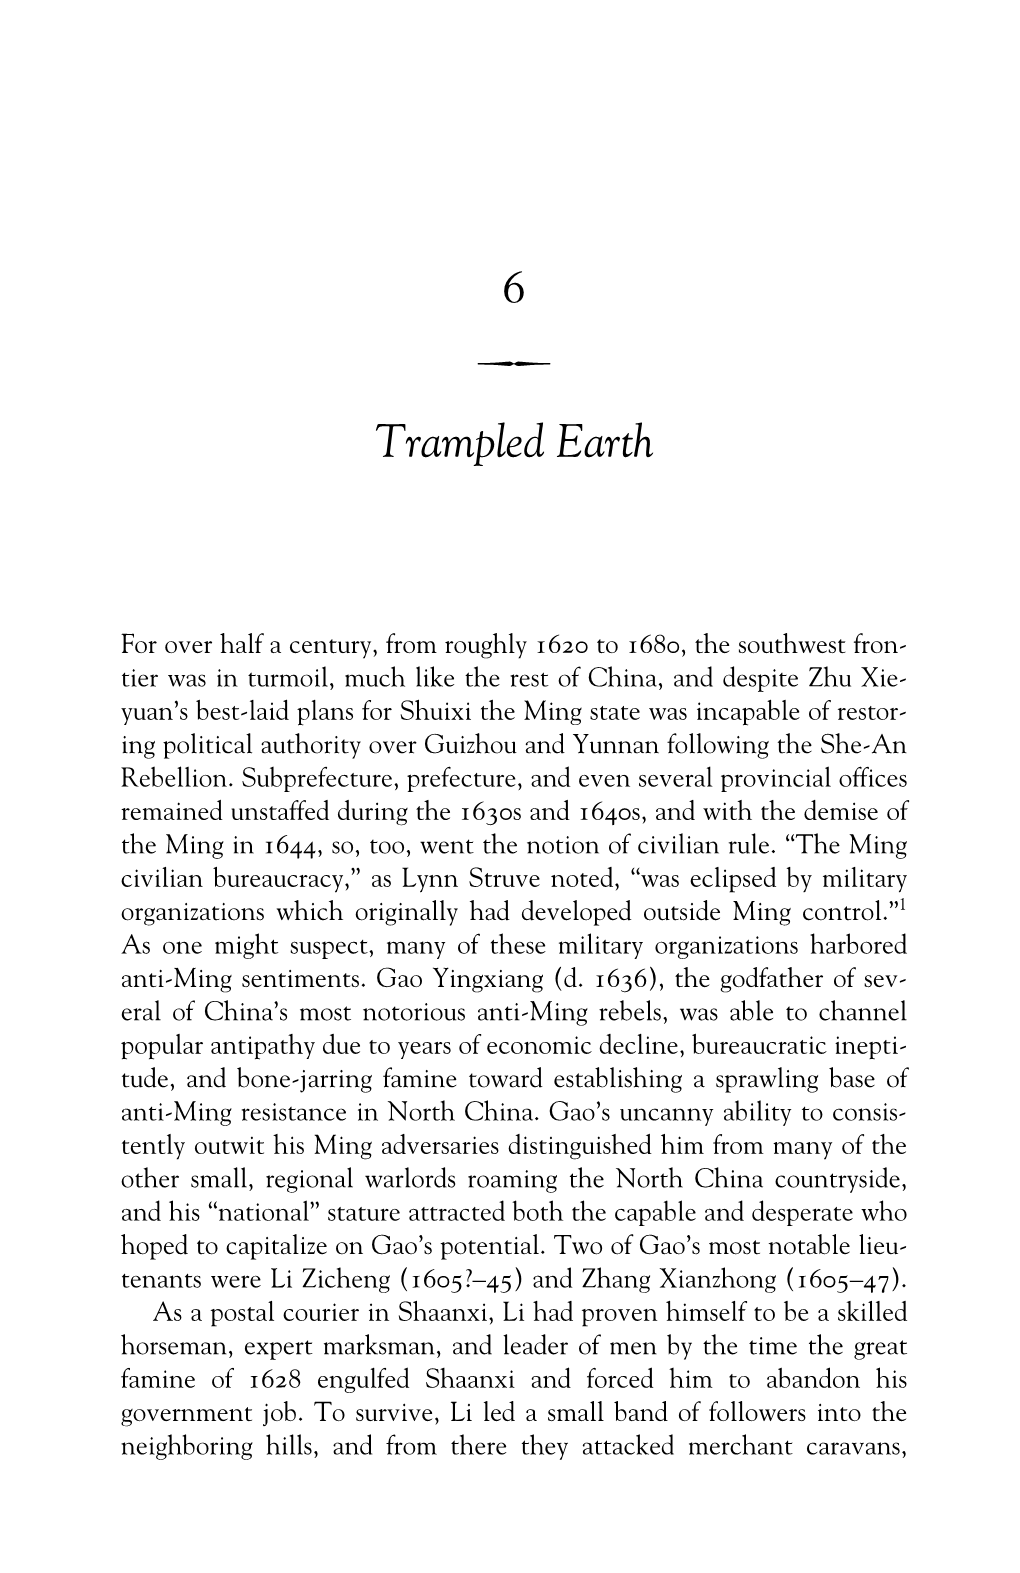 Trampled Earth